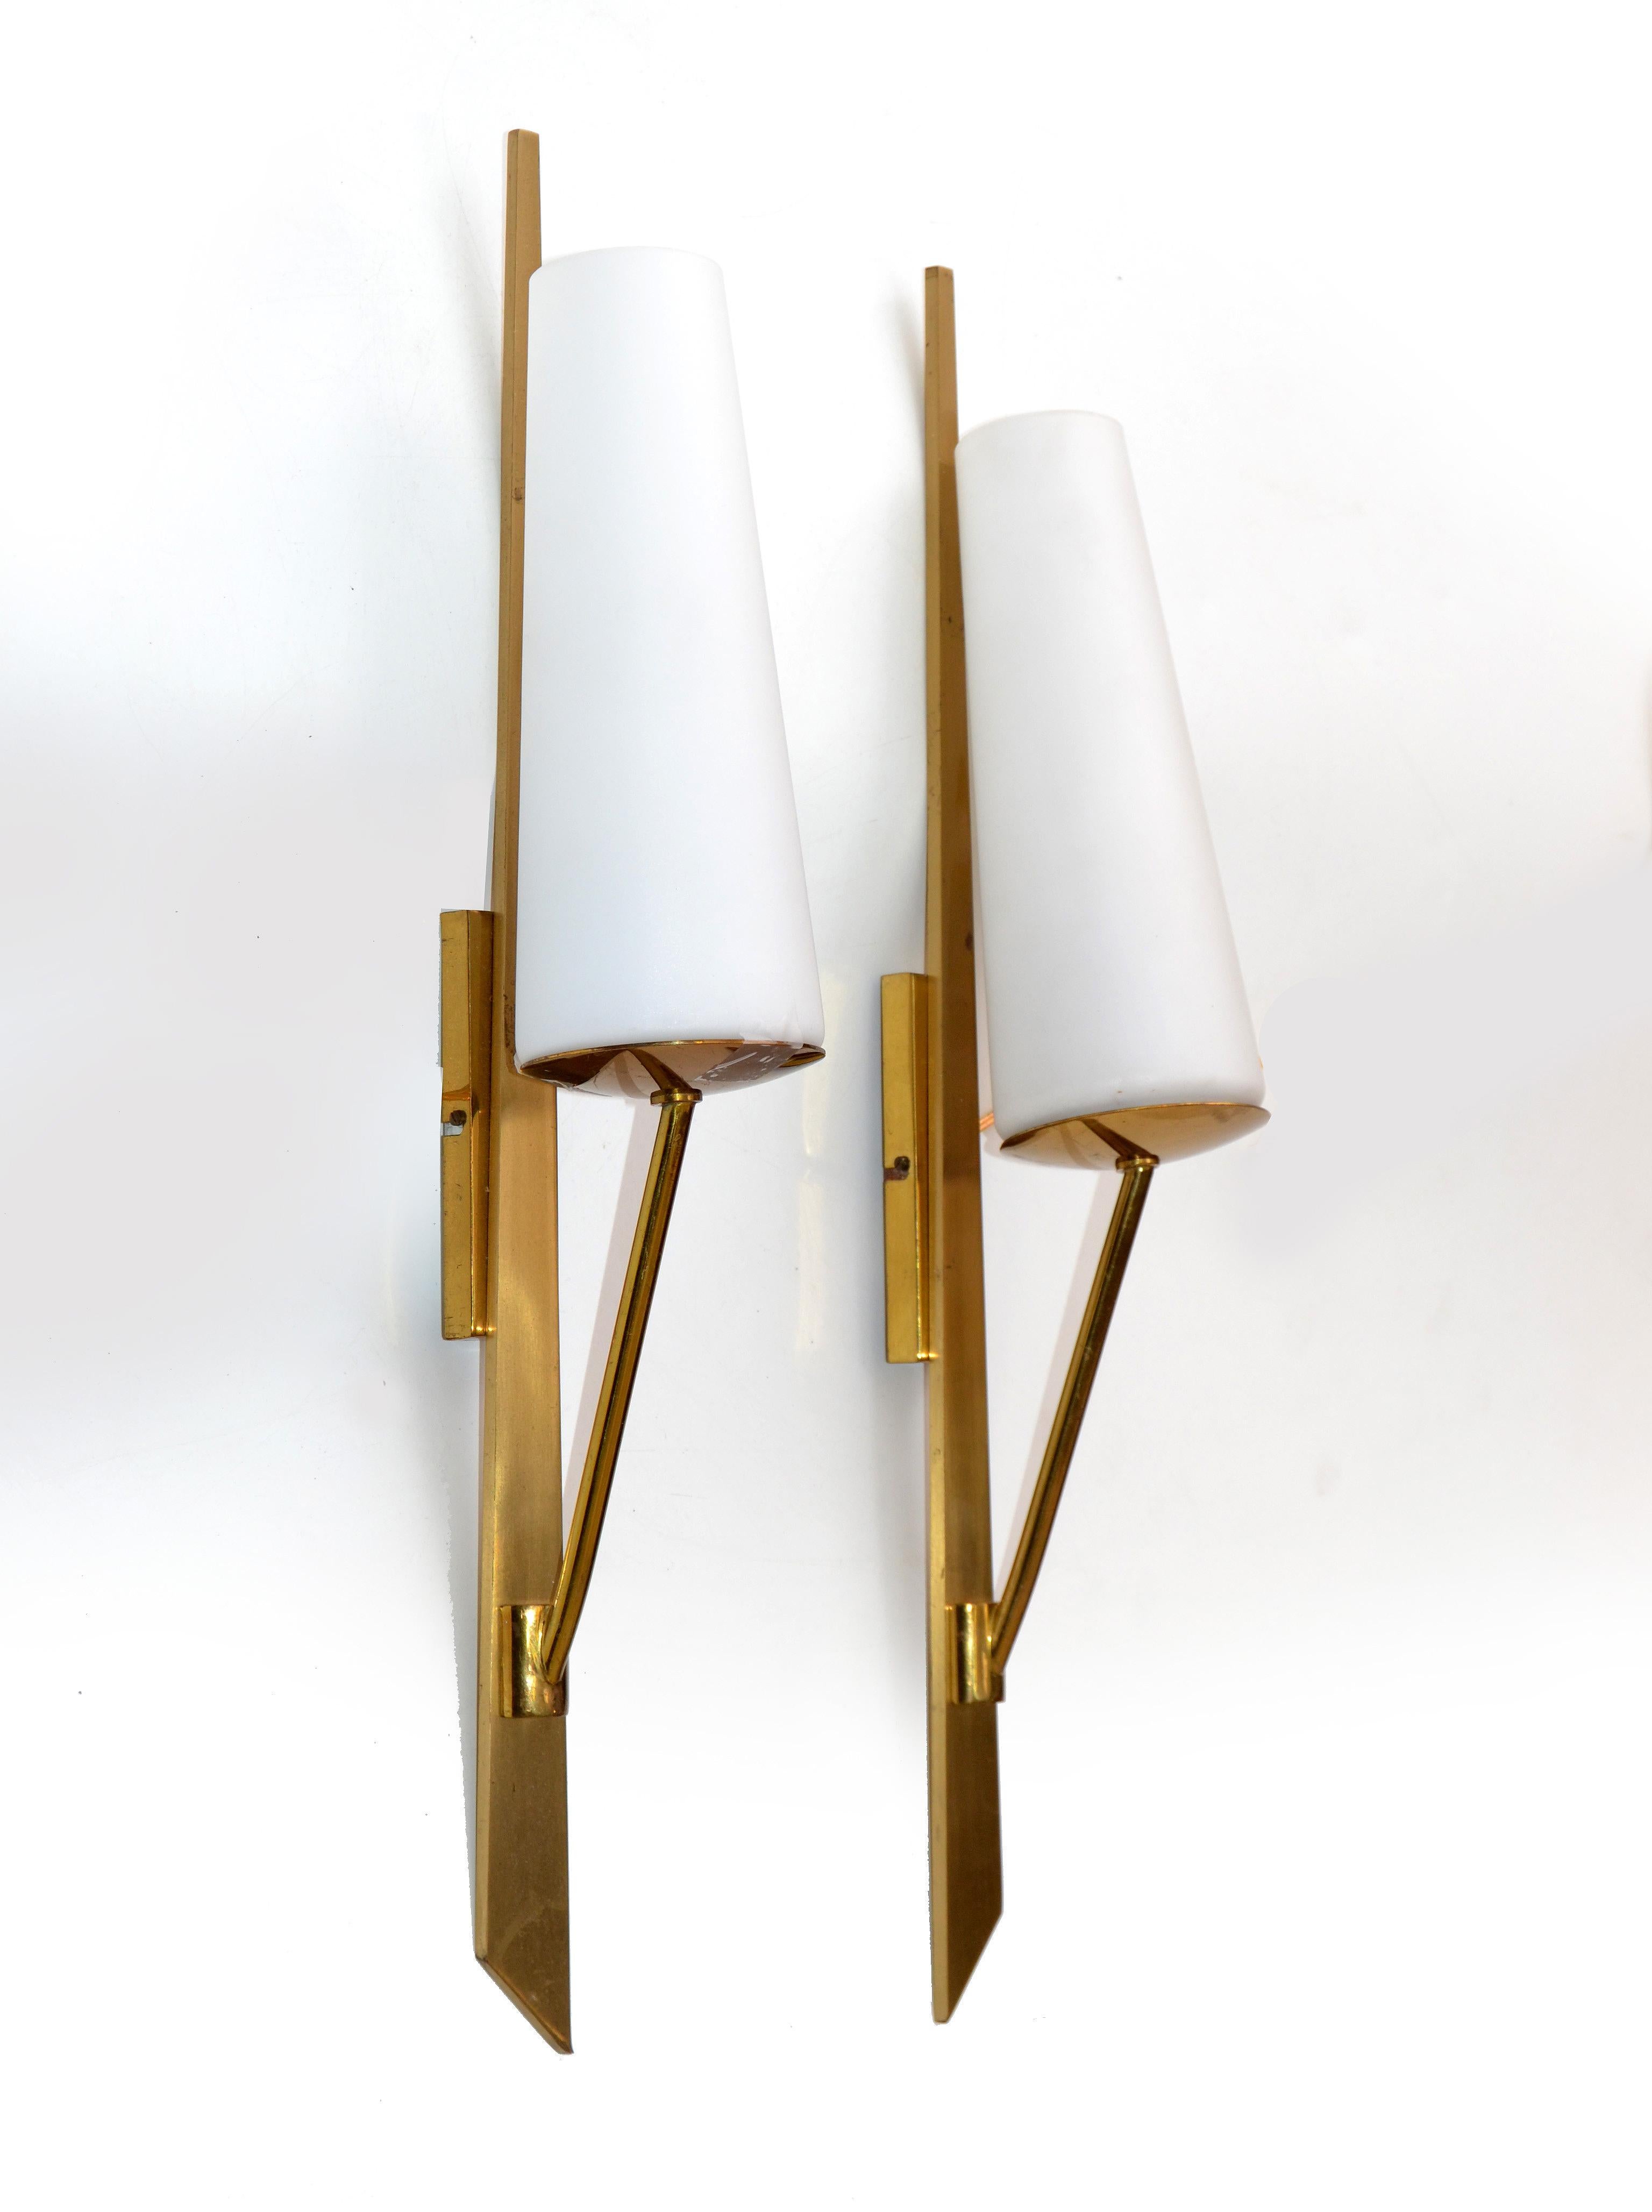 French Maison Arlus Brass Sconces, 4 pairs available